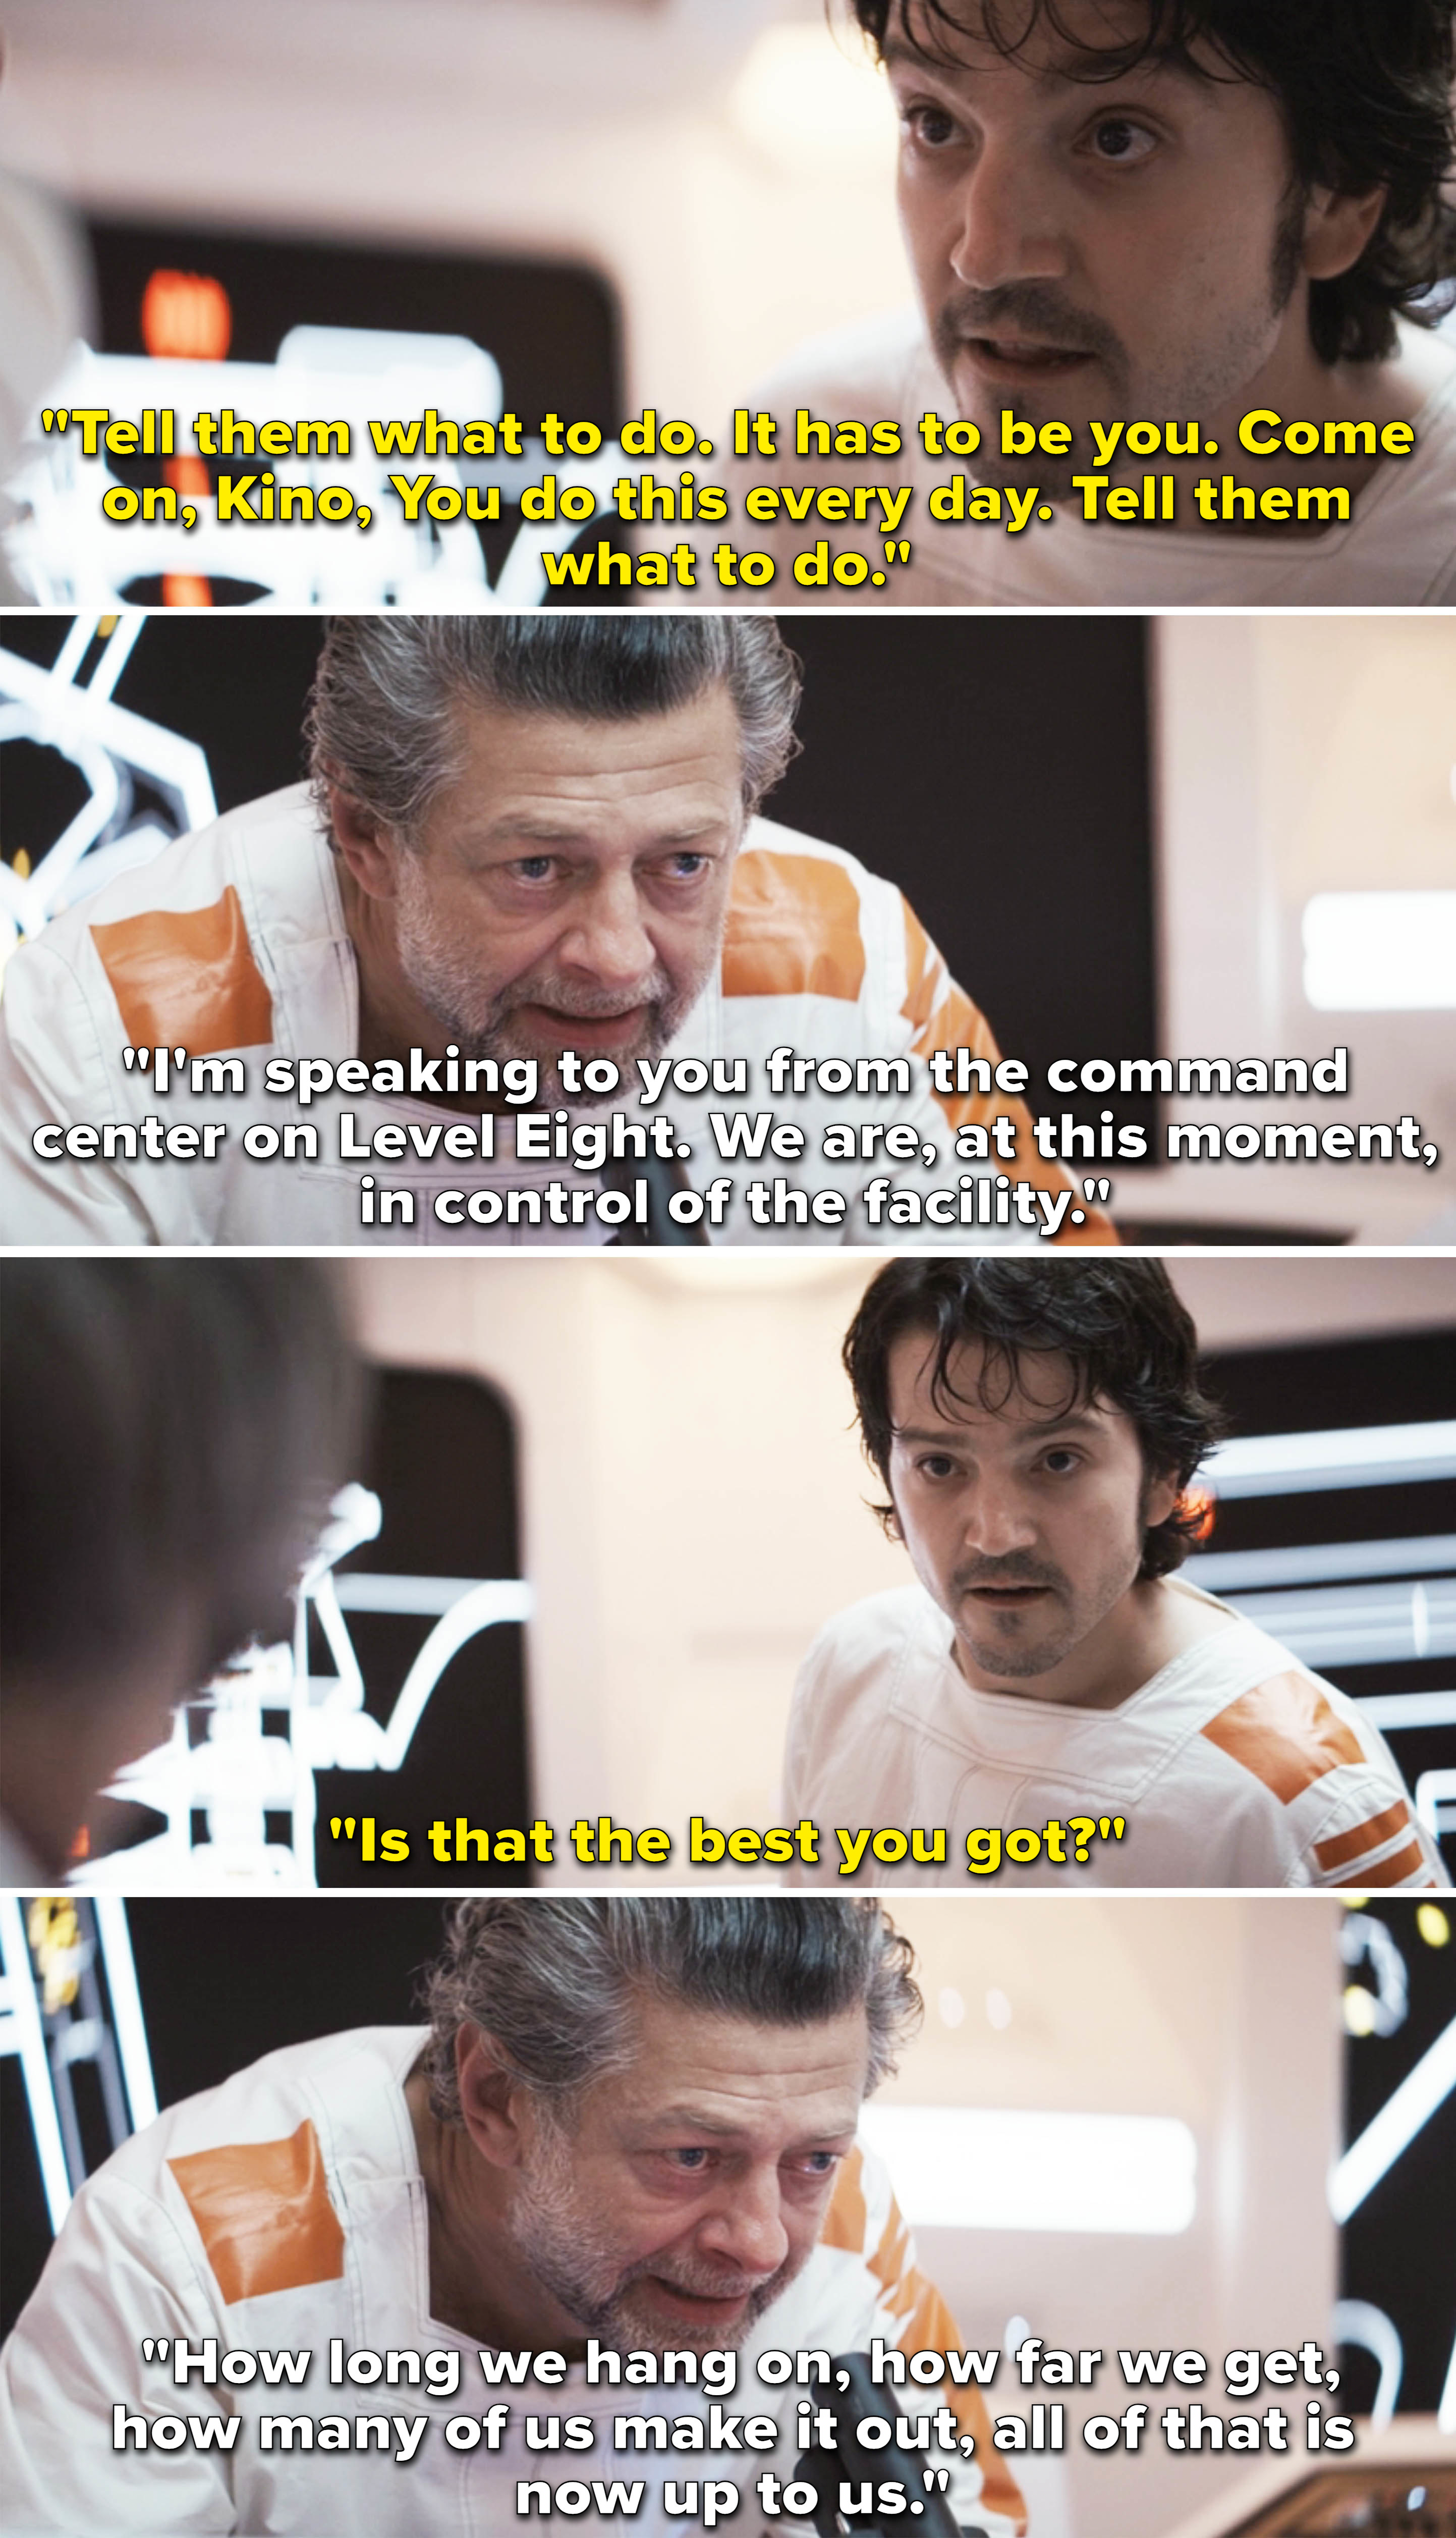 two characters talking to a command center and trying to figure out how long they can hang on and how many people will make it out